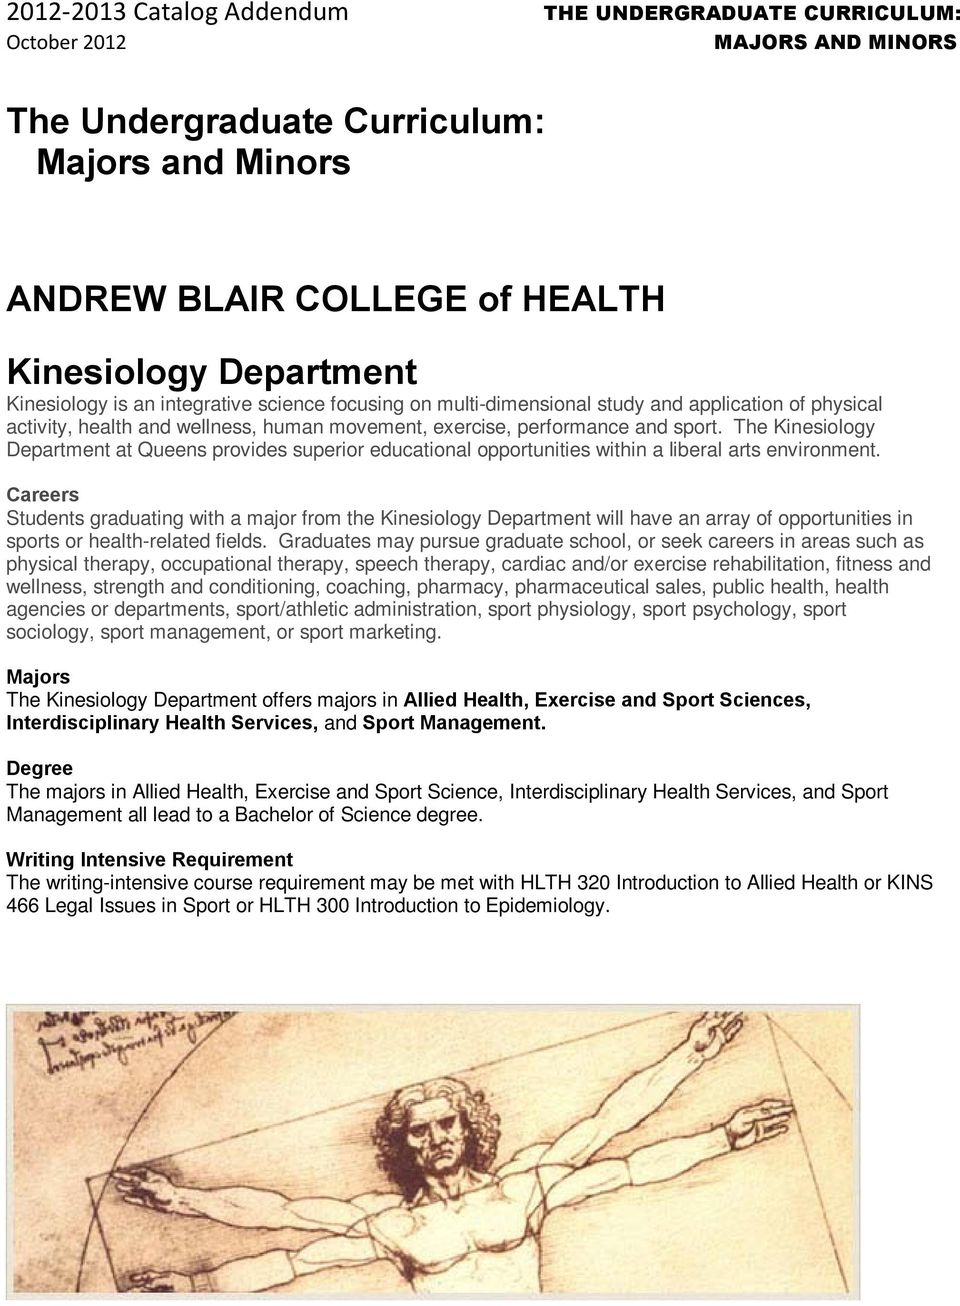 The Kinesiology Department at Queens provides superior educational opportunities within a liberal arts environment.